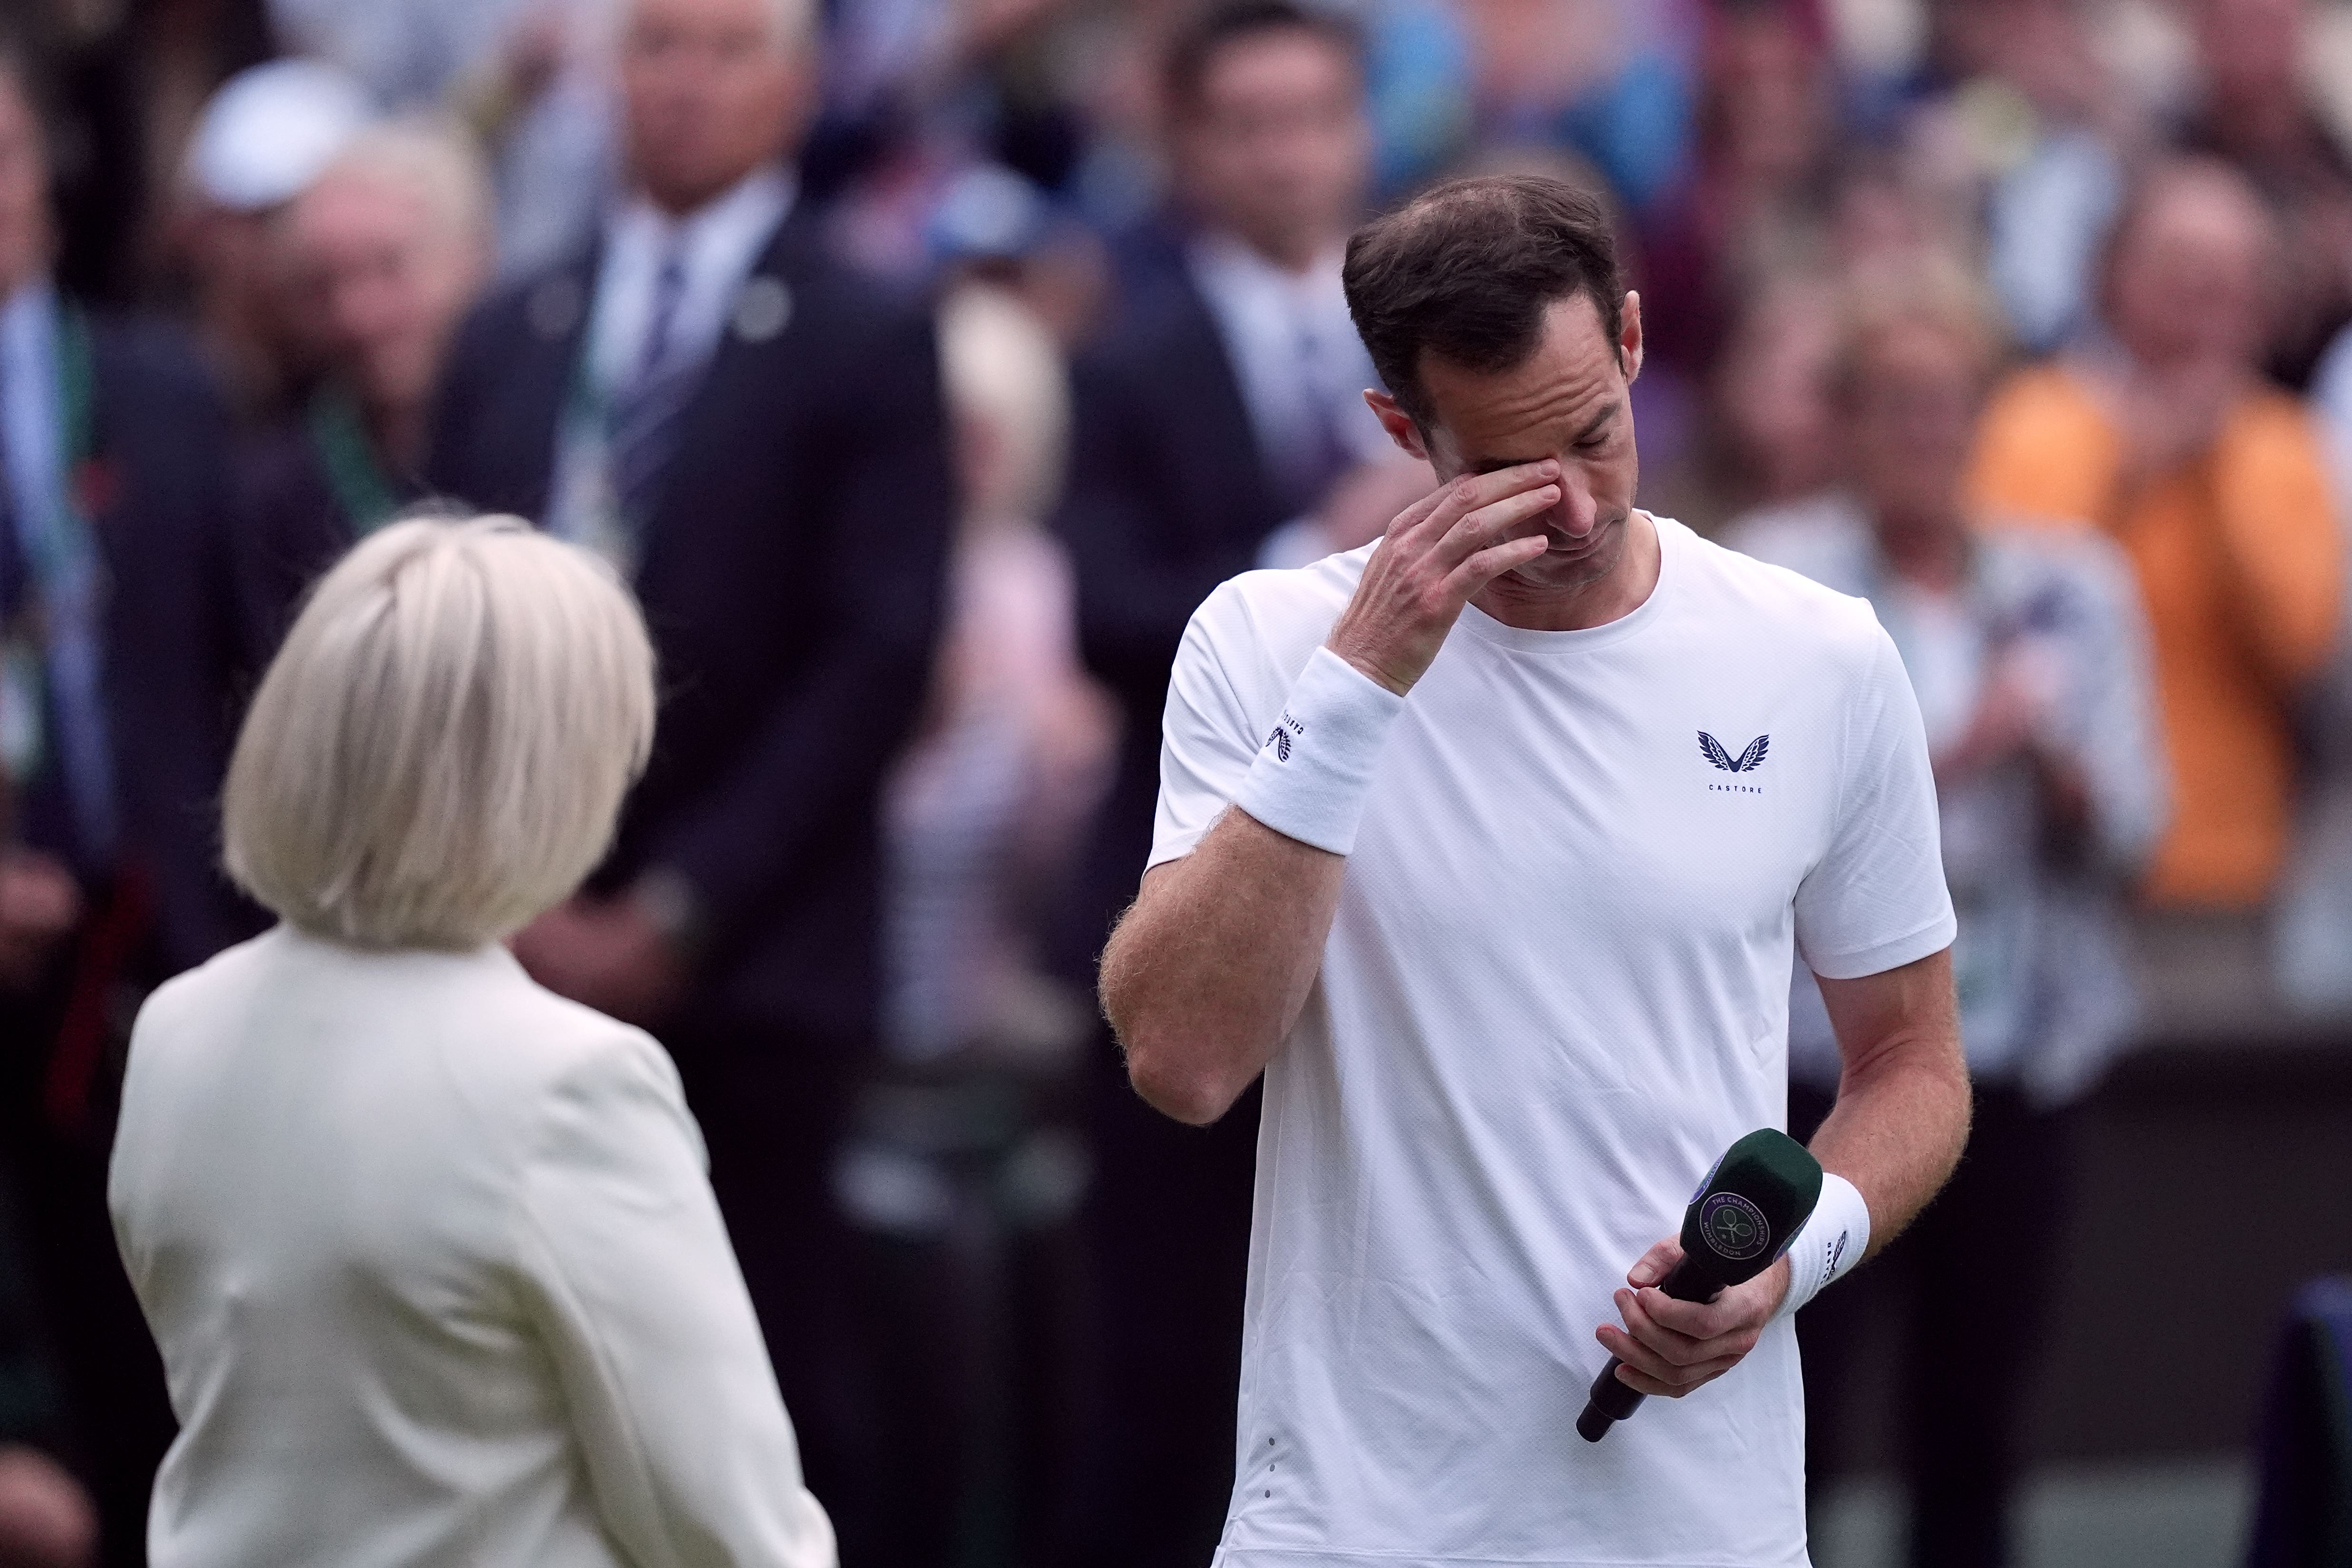 Andy Murray struggles to hold back the tears while talking to presenter Sue Barker after his Centre Court defeat